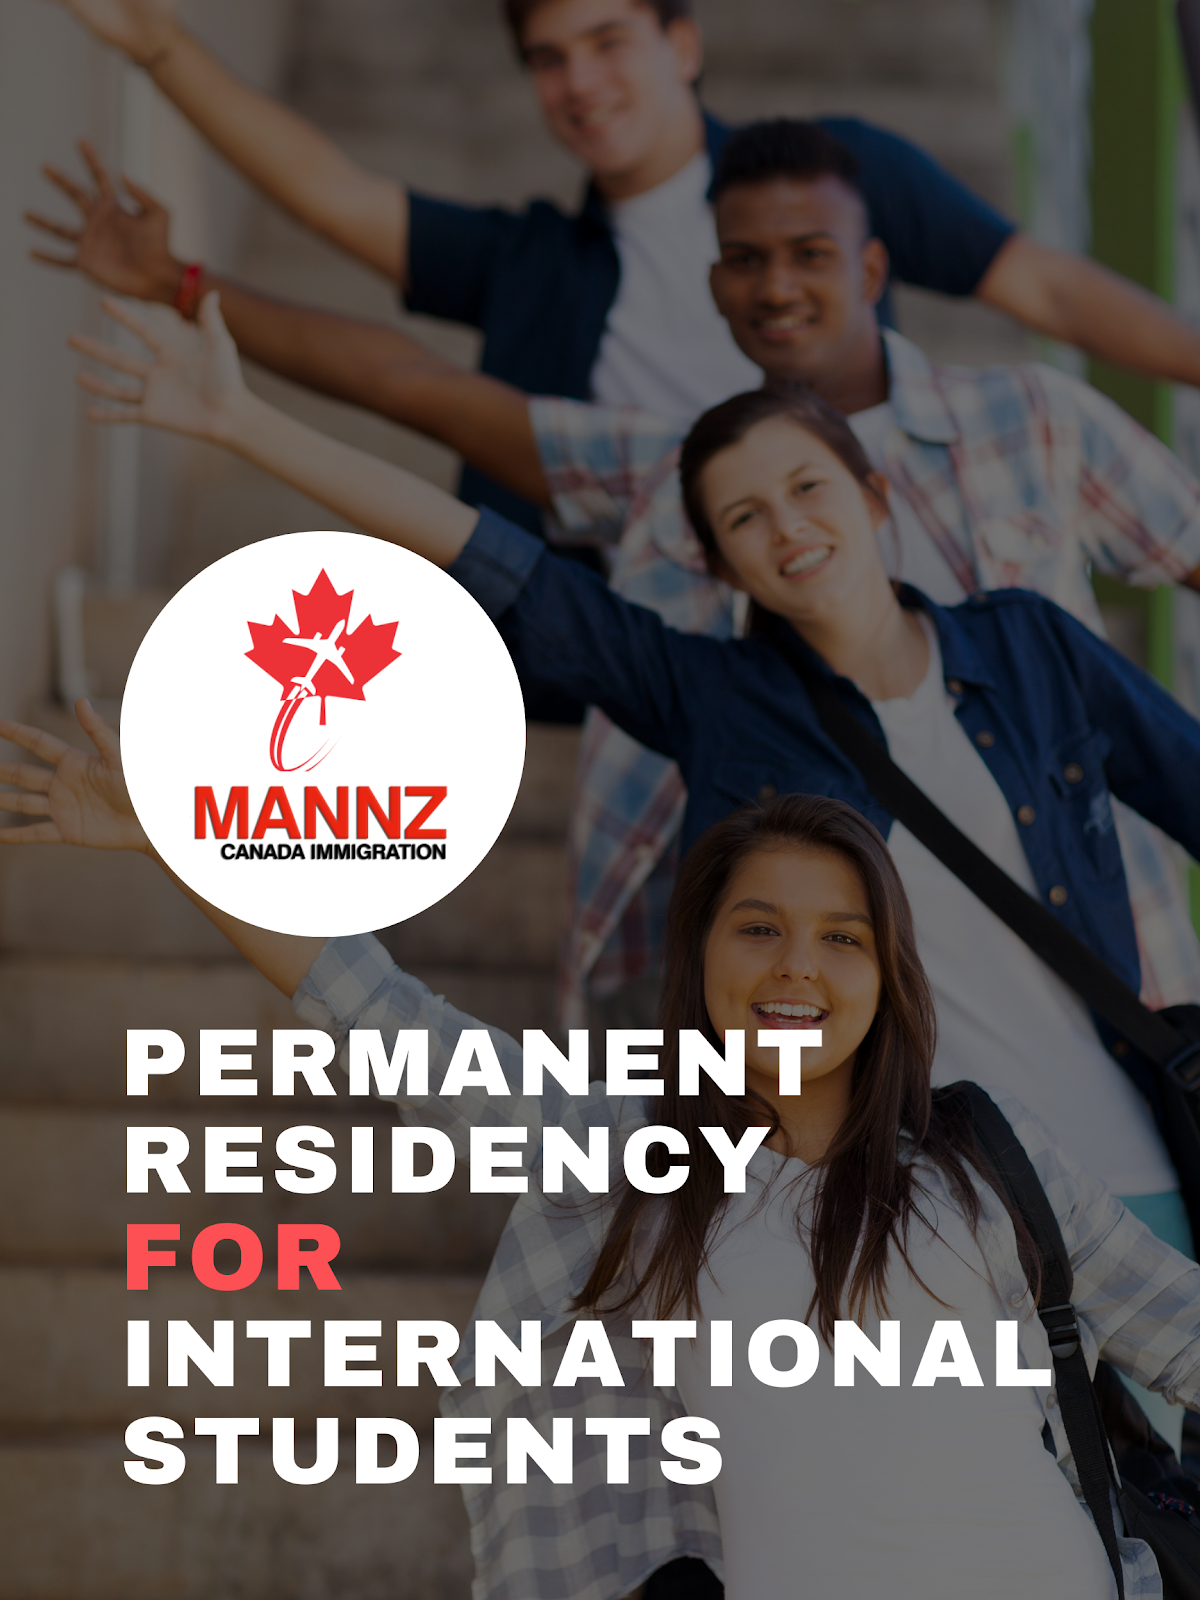 Business-Mannz-Canada-Immigration-Consultants-Inc.jpg